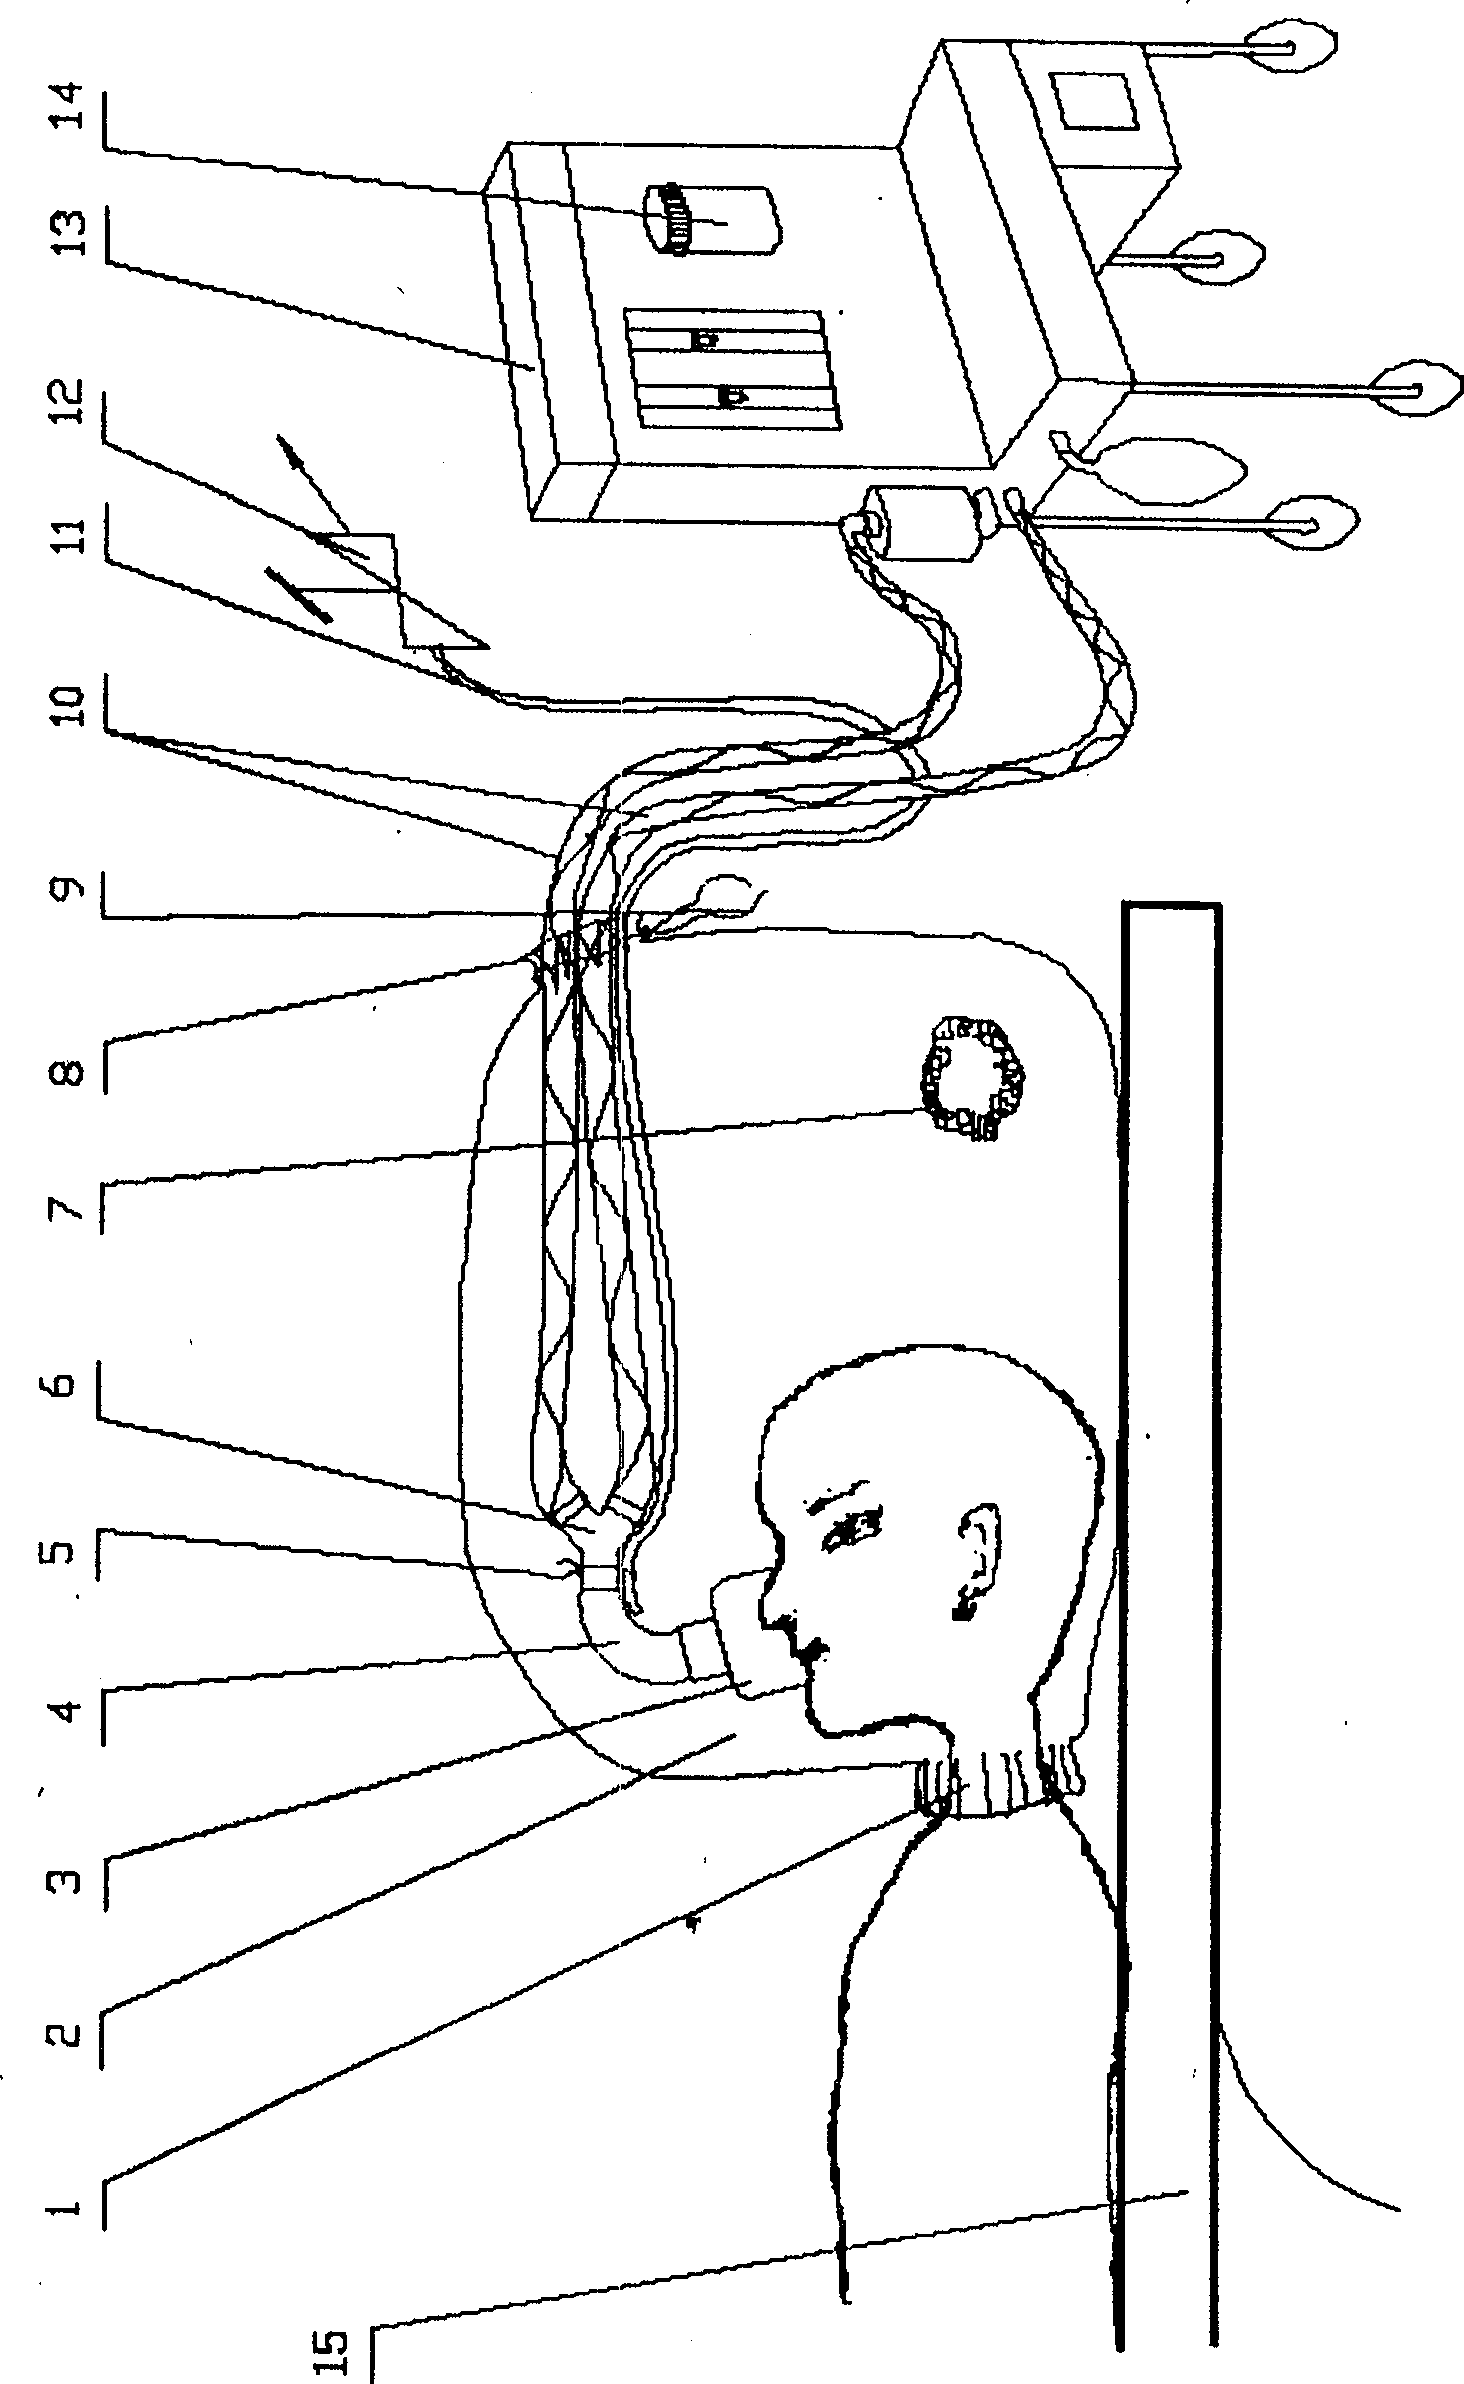 Waste air elimination apparatus for mask inhalation anesthesia